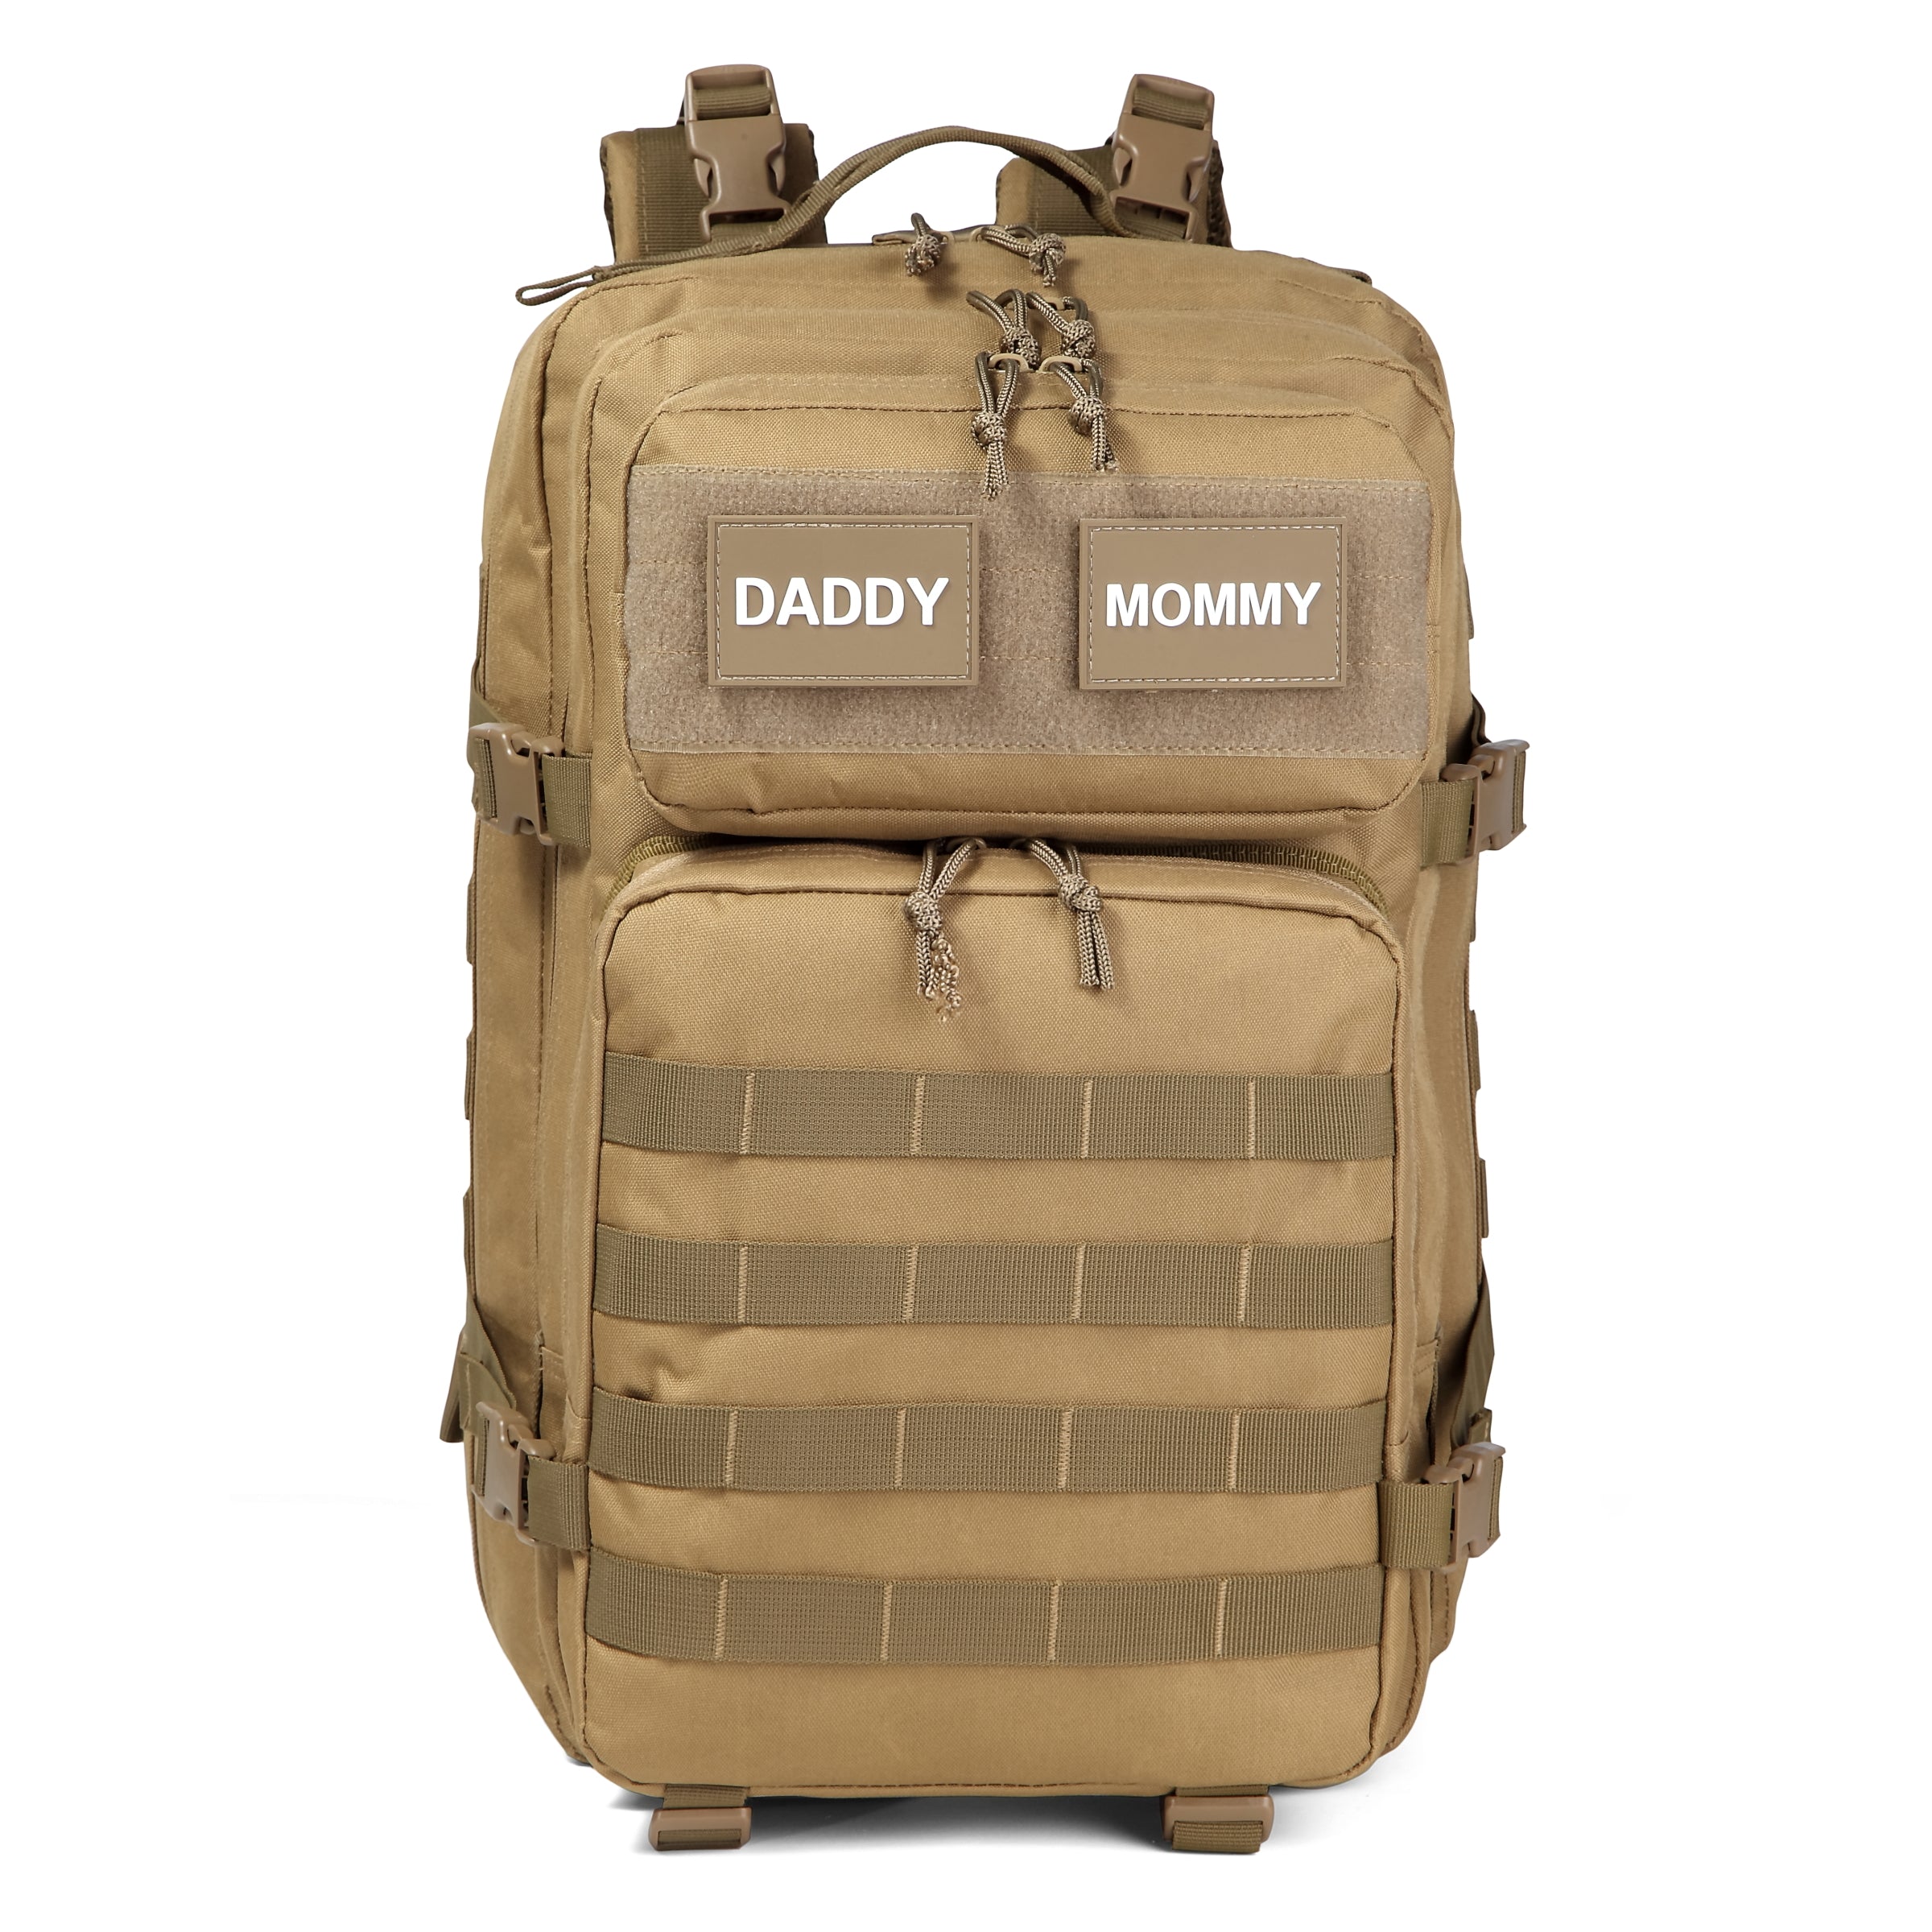 Colorland Military Tactical Style Diaper Backpack (BP239)